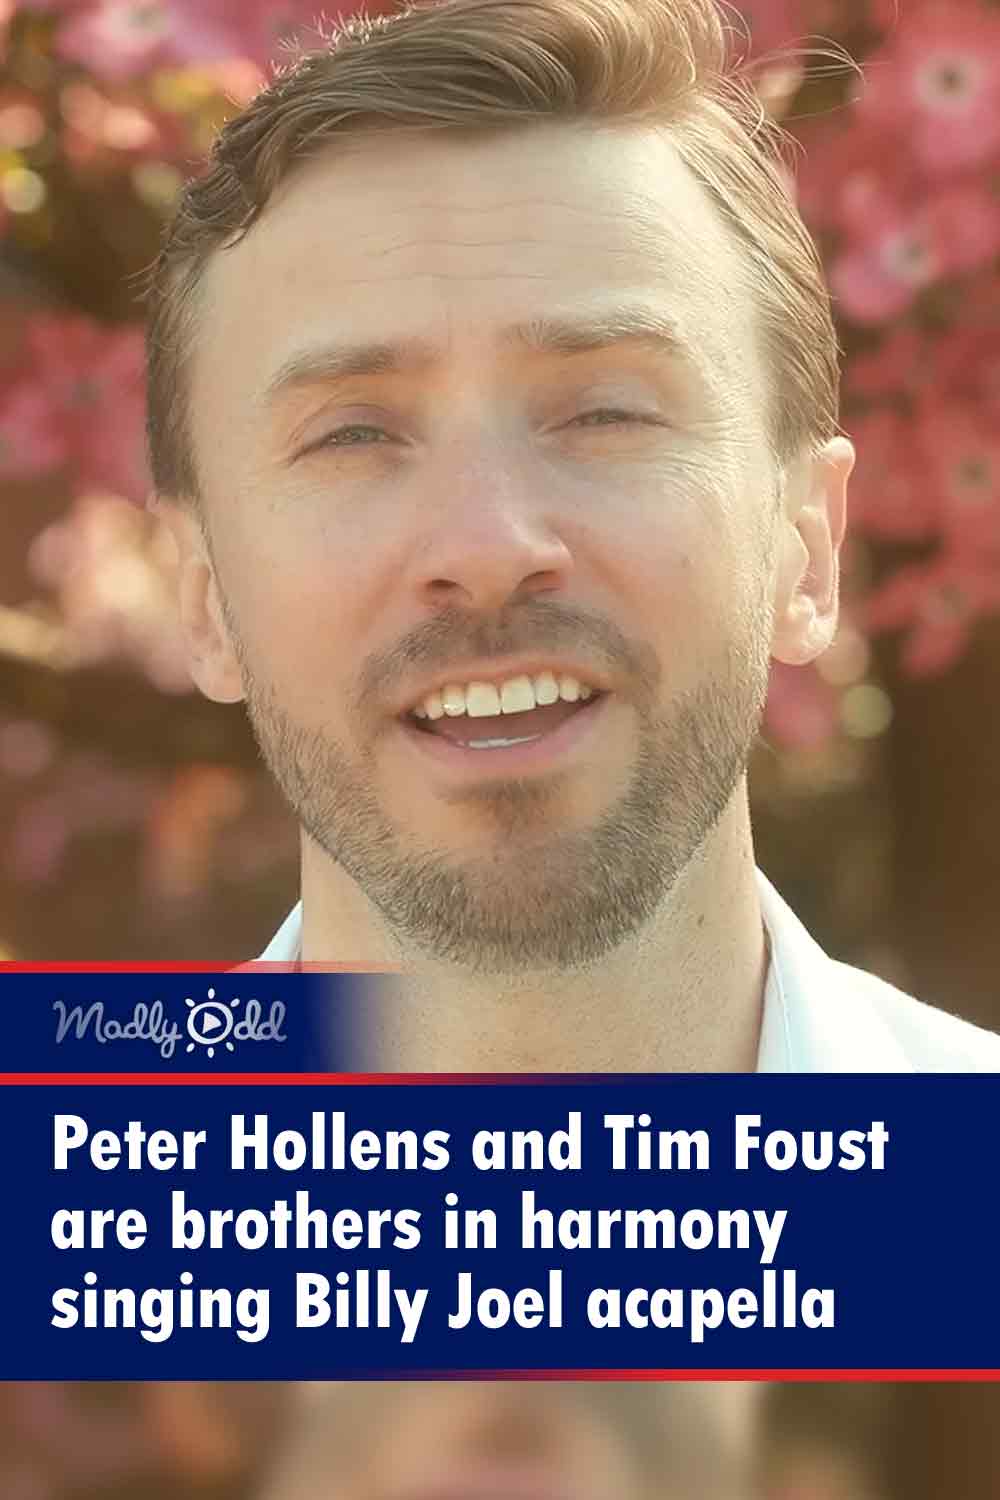 Peter Hollens and Tim Foust are brothers in harmony singing Billy Joel acapella